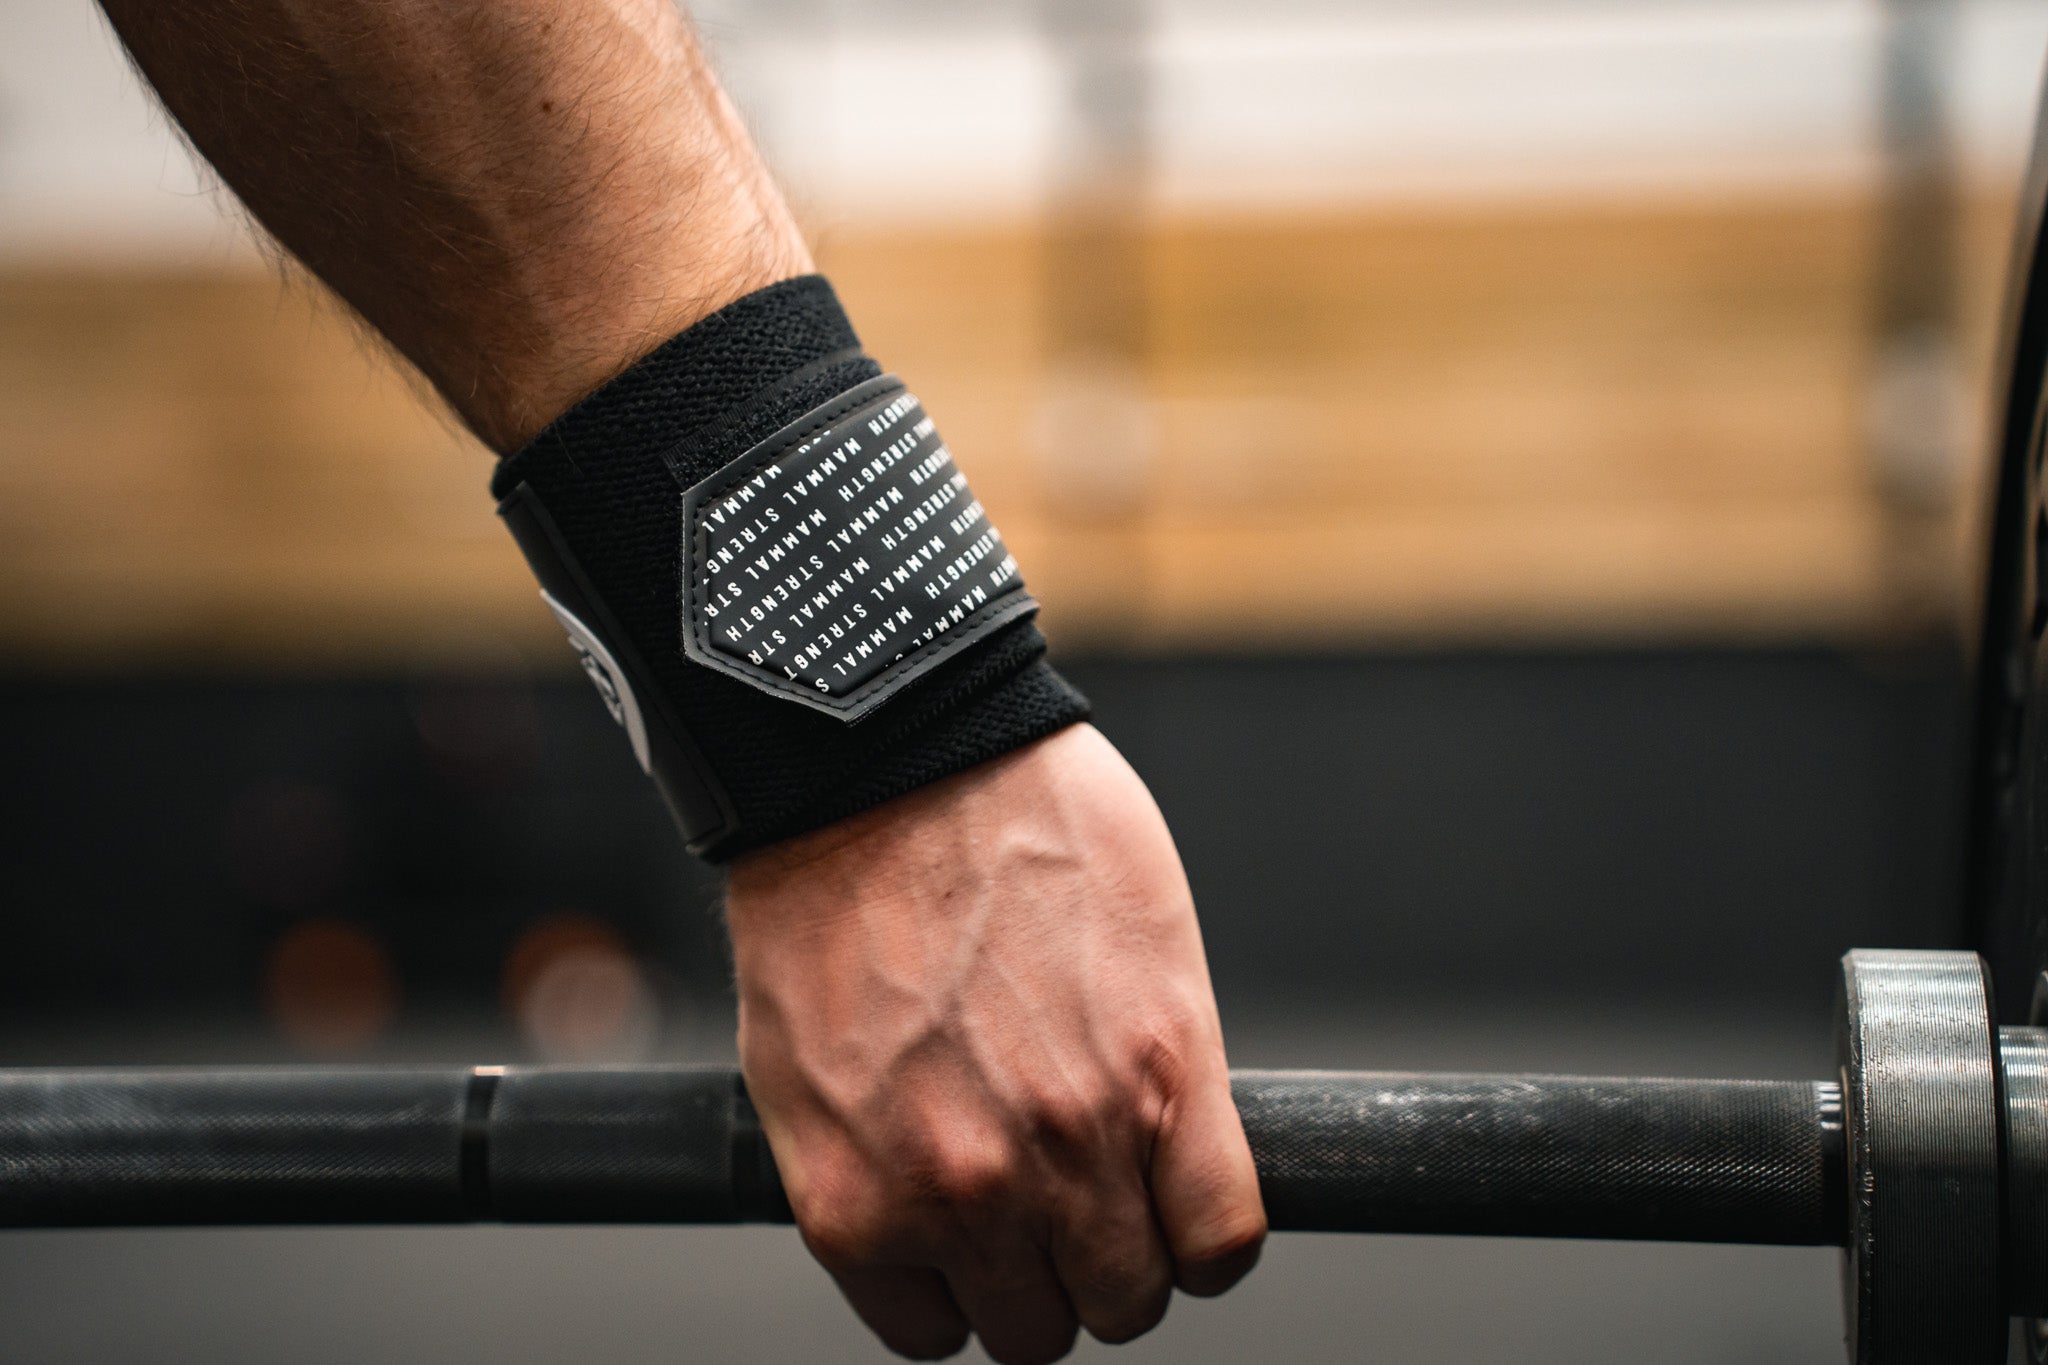 Next-level support with Mammal Strength V2 Heavy Duty Wrist Wraps for maximum strength training and workouts - gym, Crossfit